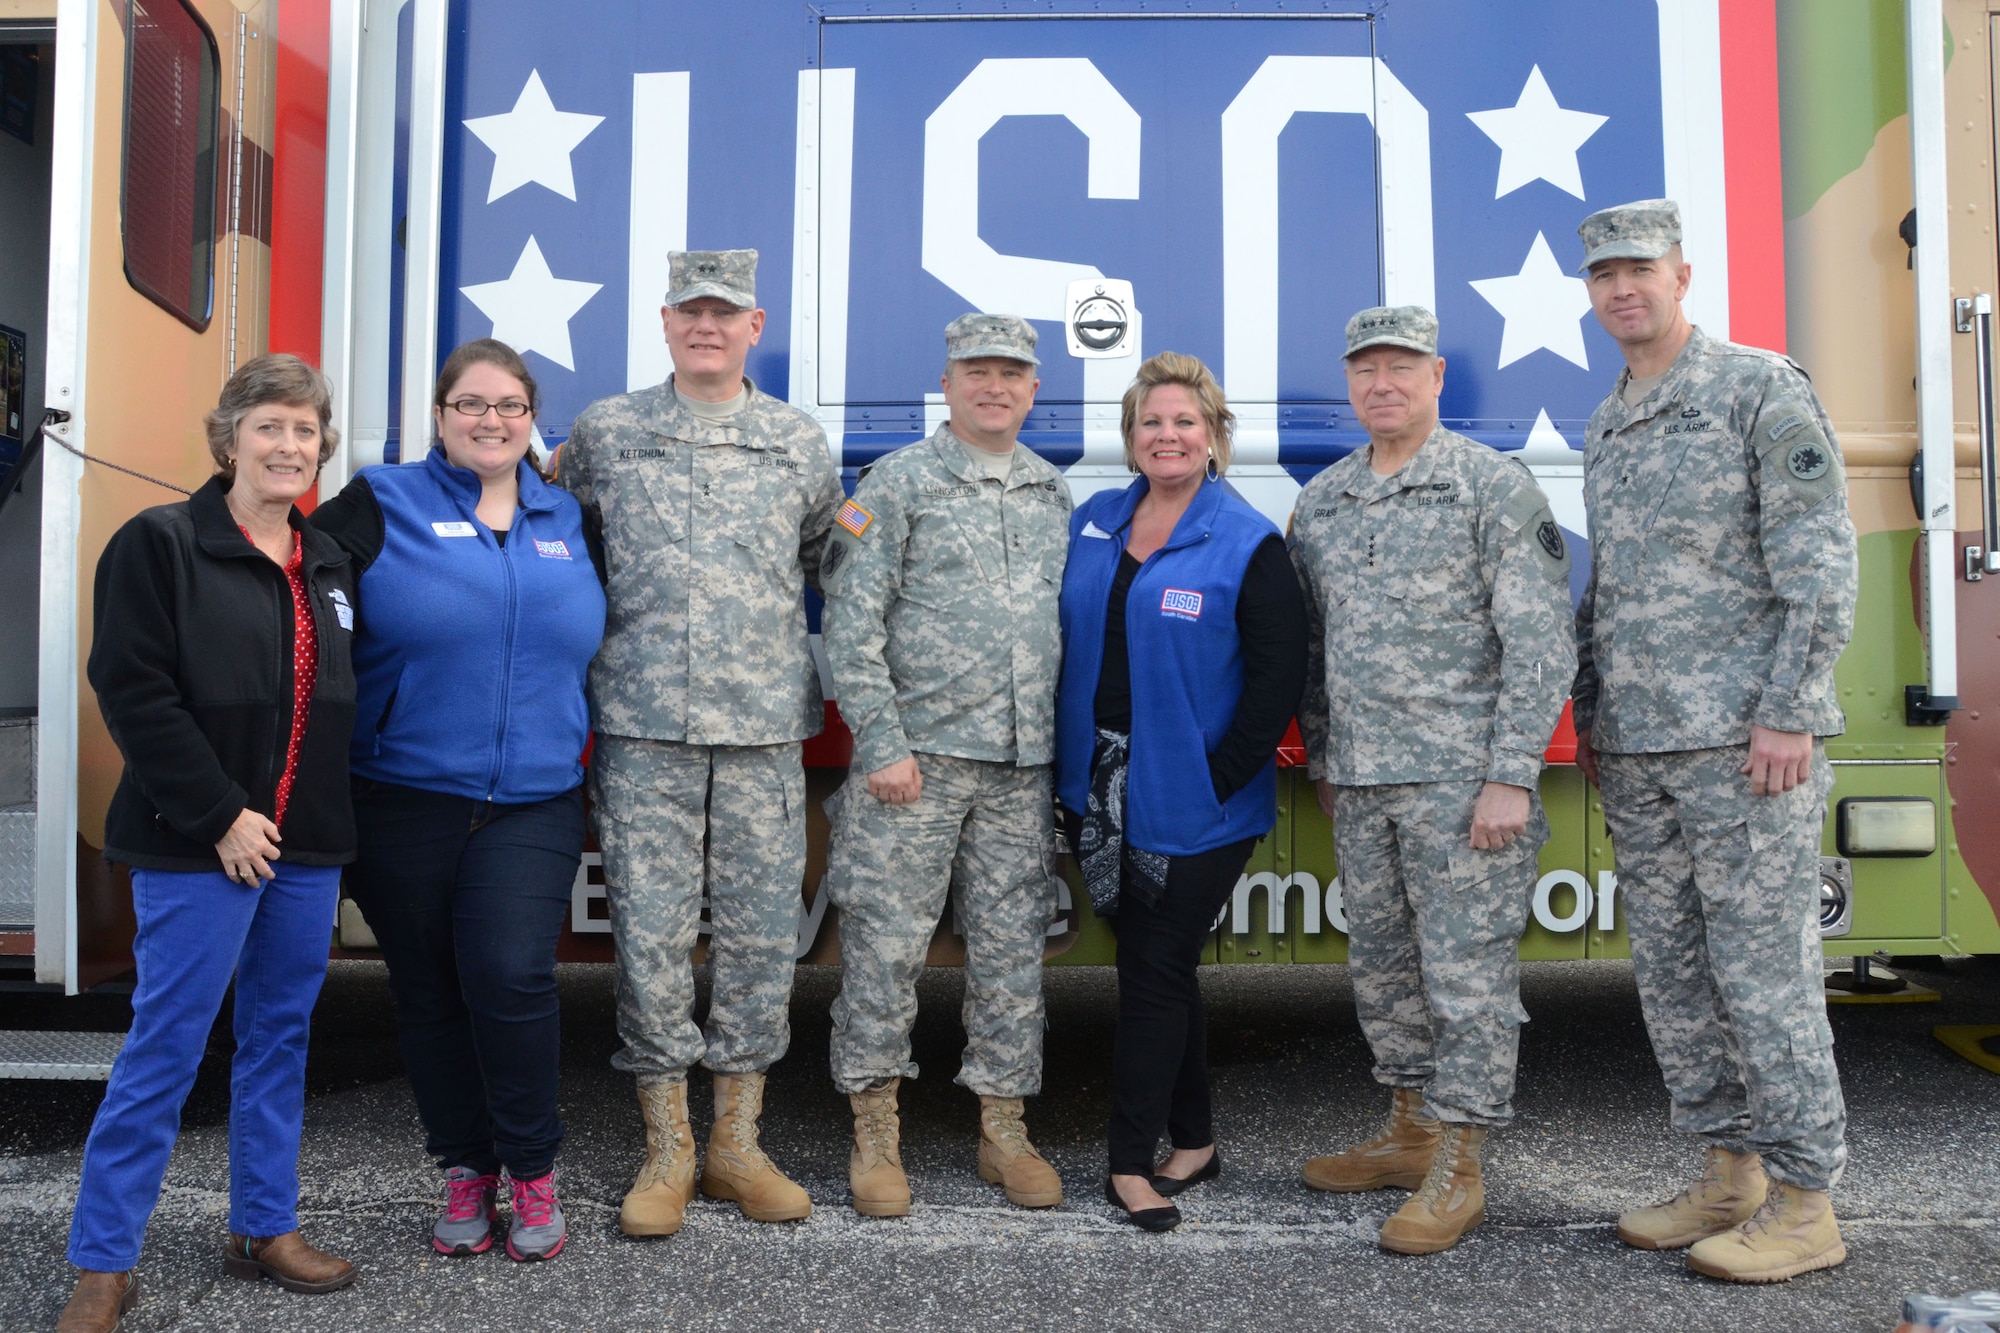 U.S. Army Gen. Frank J. Grass, Chief of the National Guard Bureau and a member of the Joint Chiefs of Staff, and distinguished visitors tour the United Service Organizations (USO) mobile canteen during Vigilant Guard South Carolina at the Georgetown Airport in Georgetown, S.C., March 9, 2015. Vigilant Guard is a series of federally funded disaster-response drills conducted by National Guard units working with federal, state and local emergency management agencies and first responders. (U.S. Air National Guard photo by Airman 1st Class Ashleigh S. Pavelek/Released)